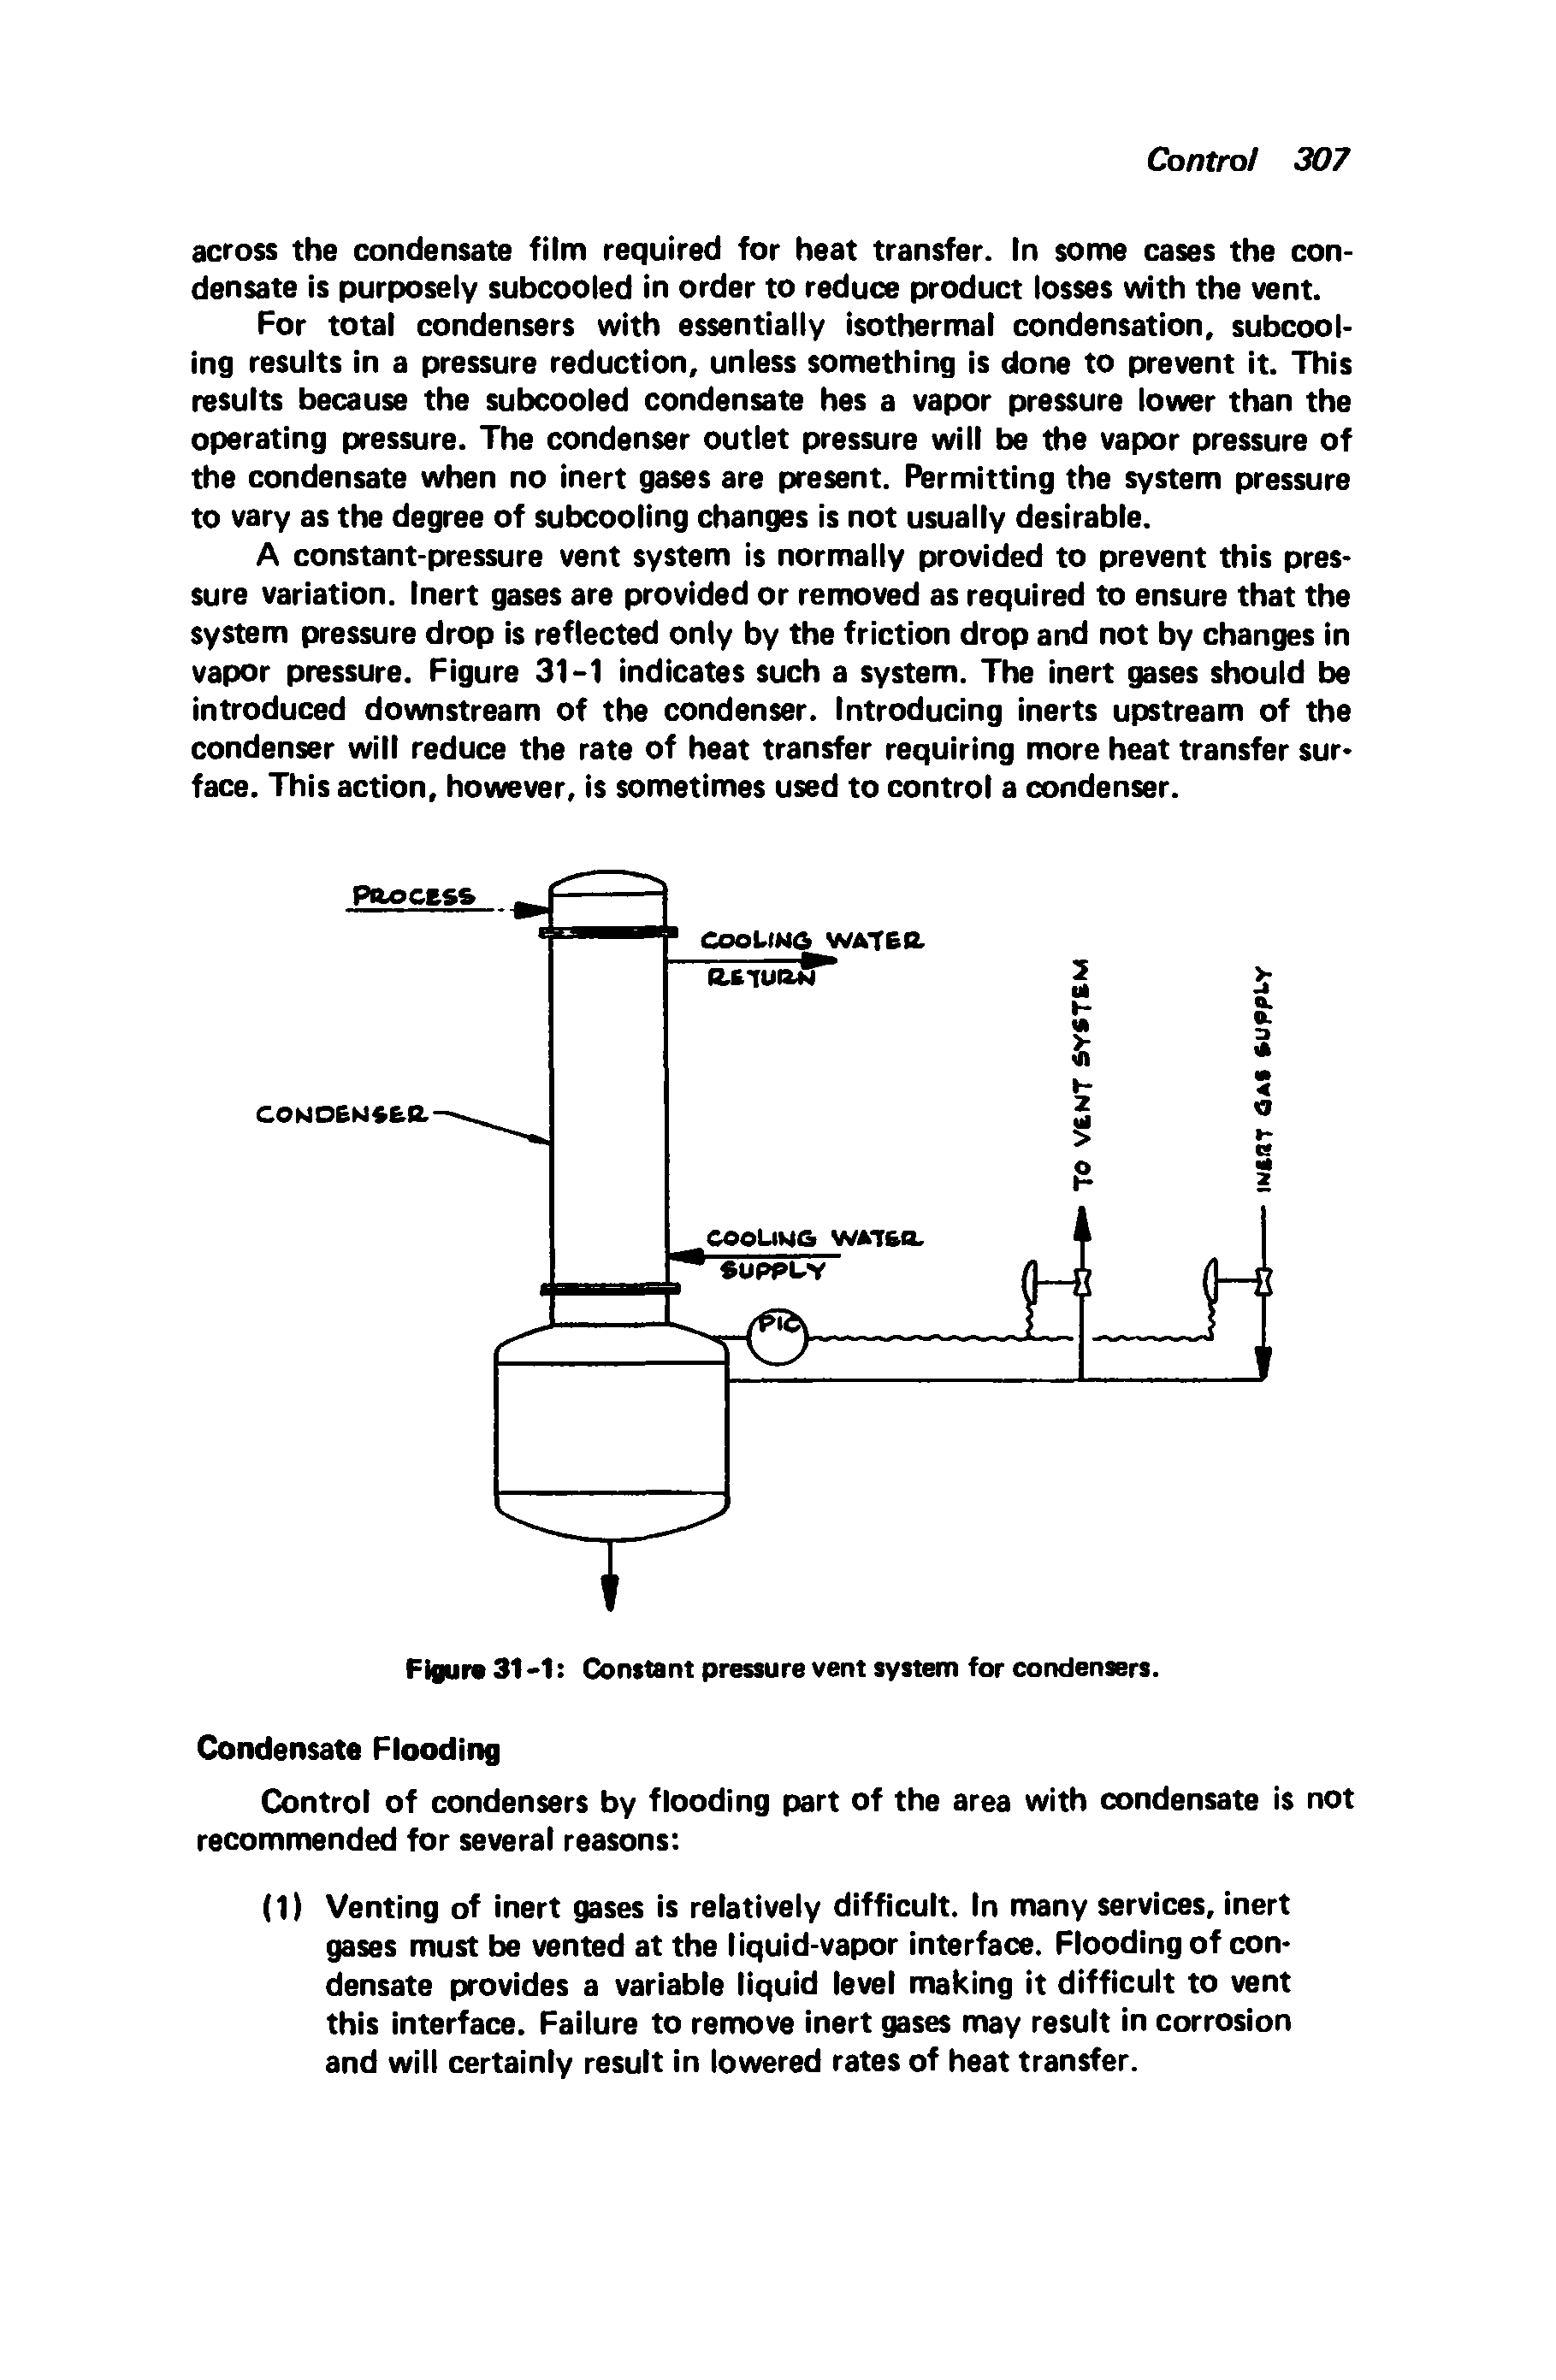 Figure 31 -1 Constant pressure vent system for condensers.